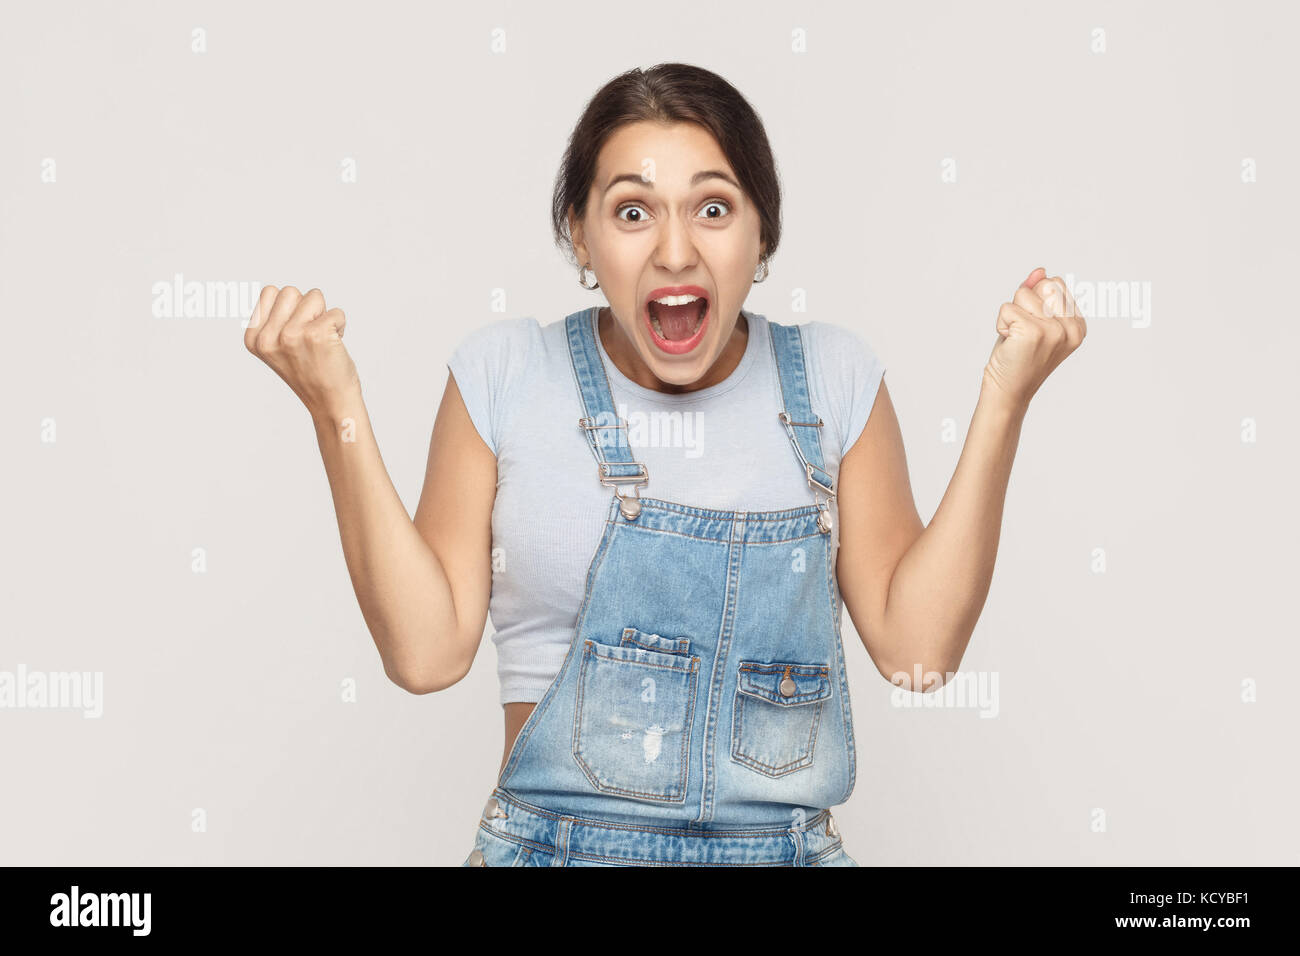 Happiness woman in denim overalls rejoicing for his success. Isolated on gray background. Indoor, studio shot Stock Photo